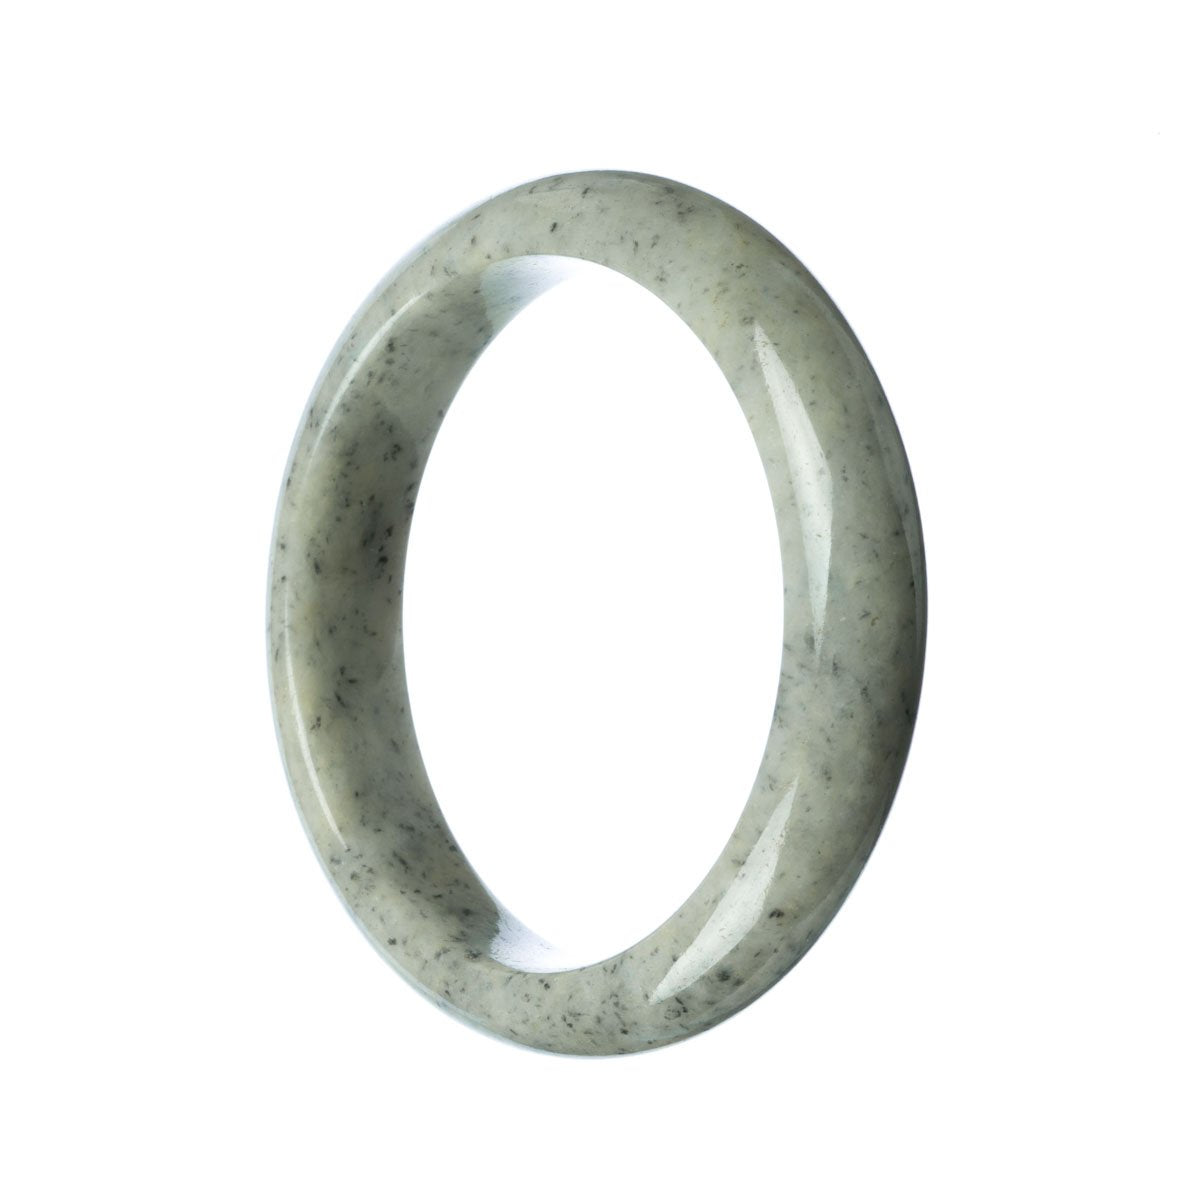 A close-up photo of a genuine Type A Grey Burmese Jade Bangle Bracelet. The bracelet is in a half-moon shape, measuring 63mm in diameter. It is a high-quality piece from the MAYS™ collection.